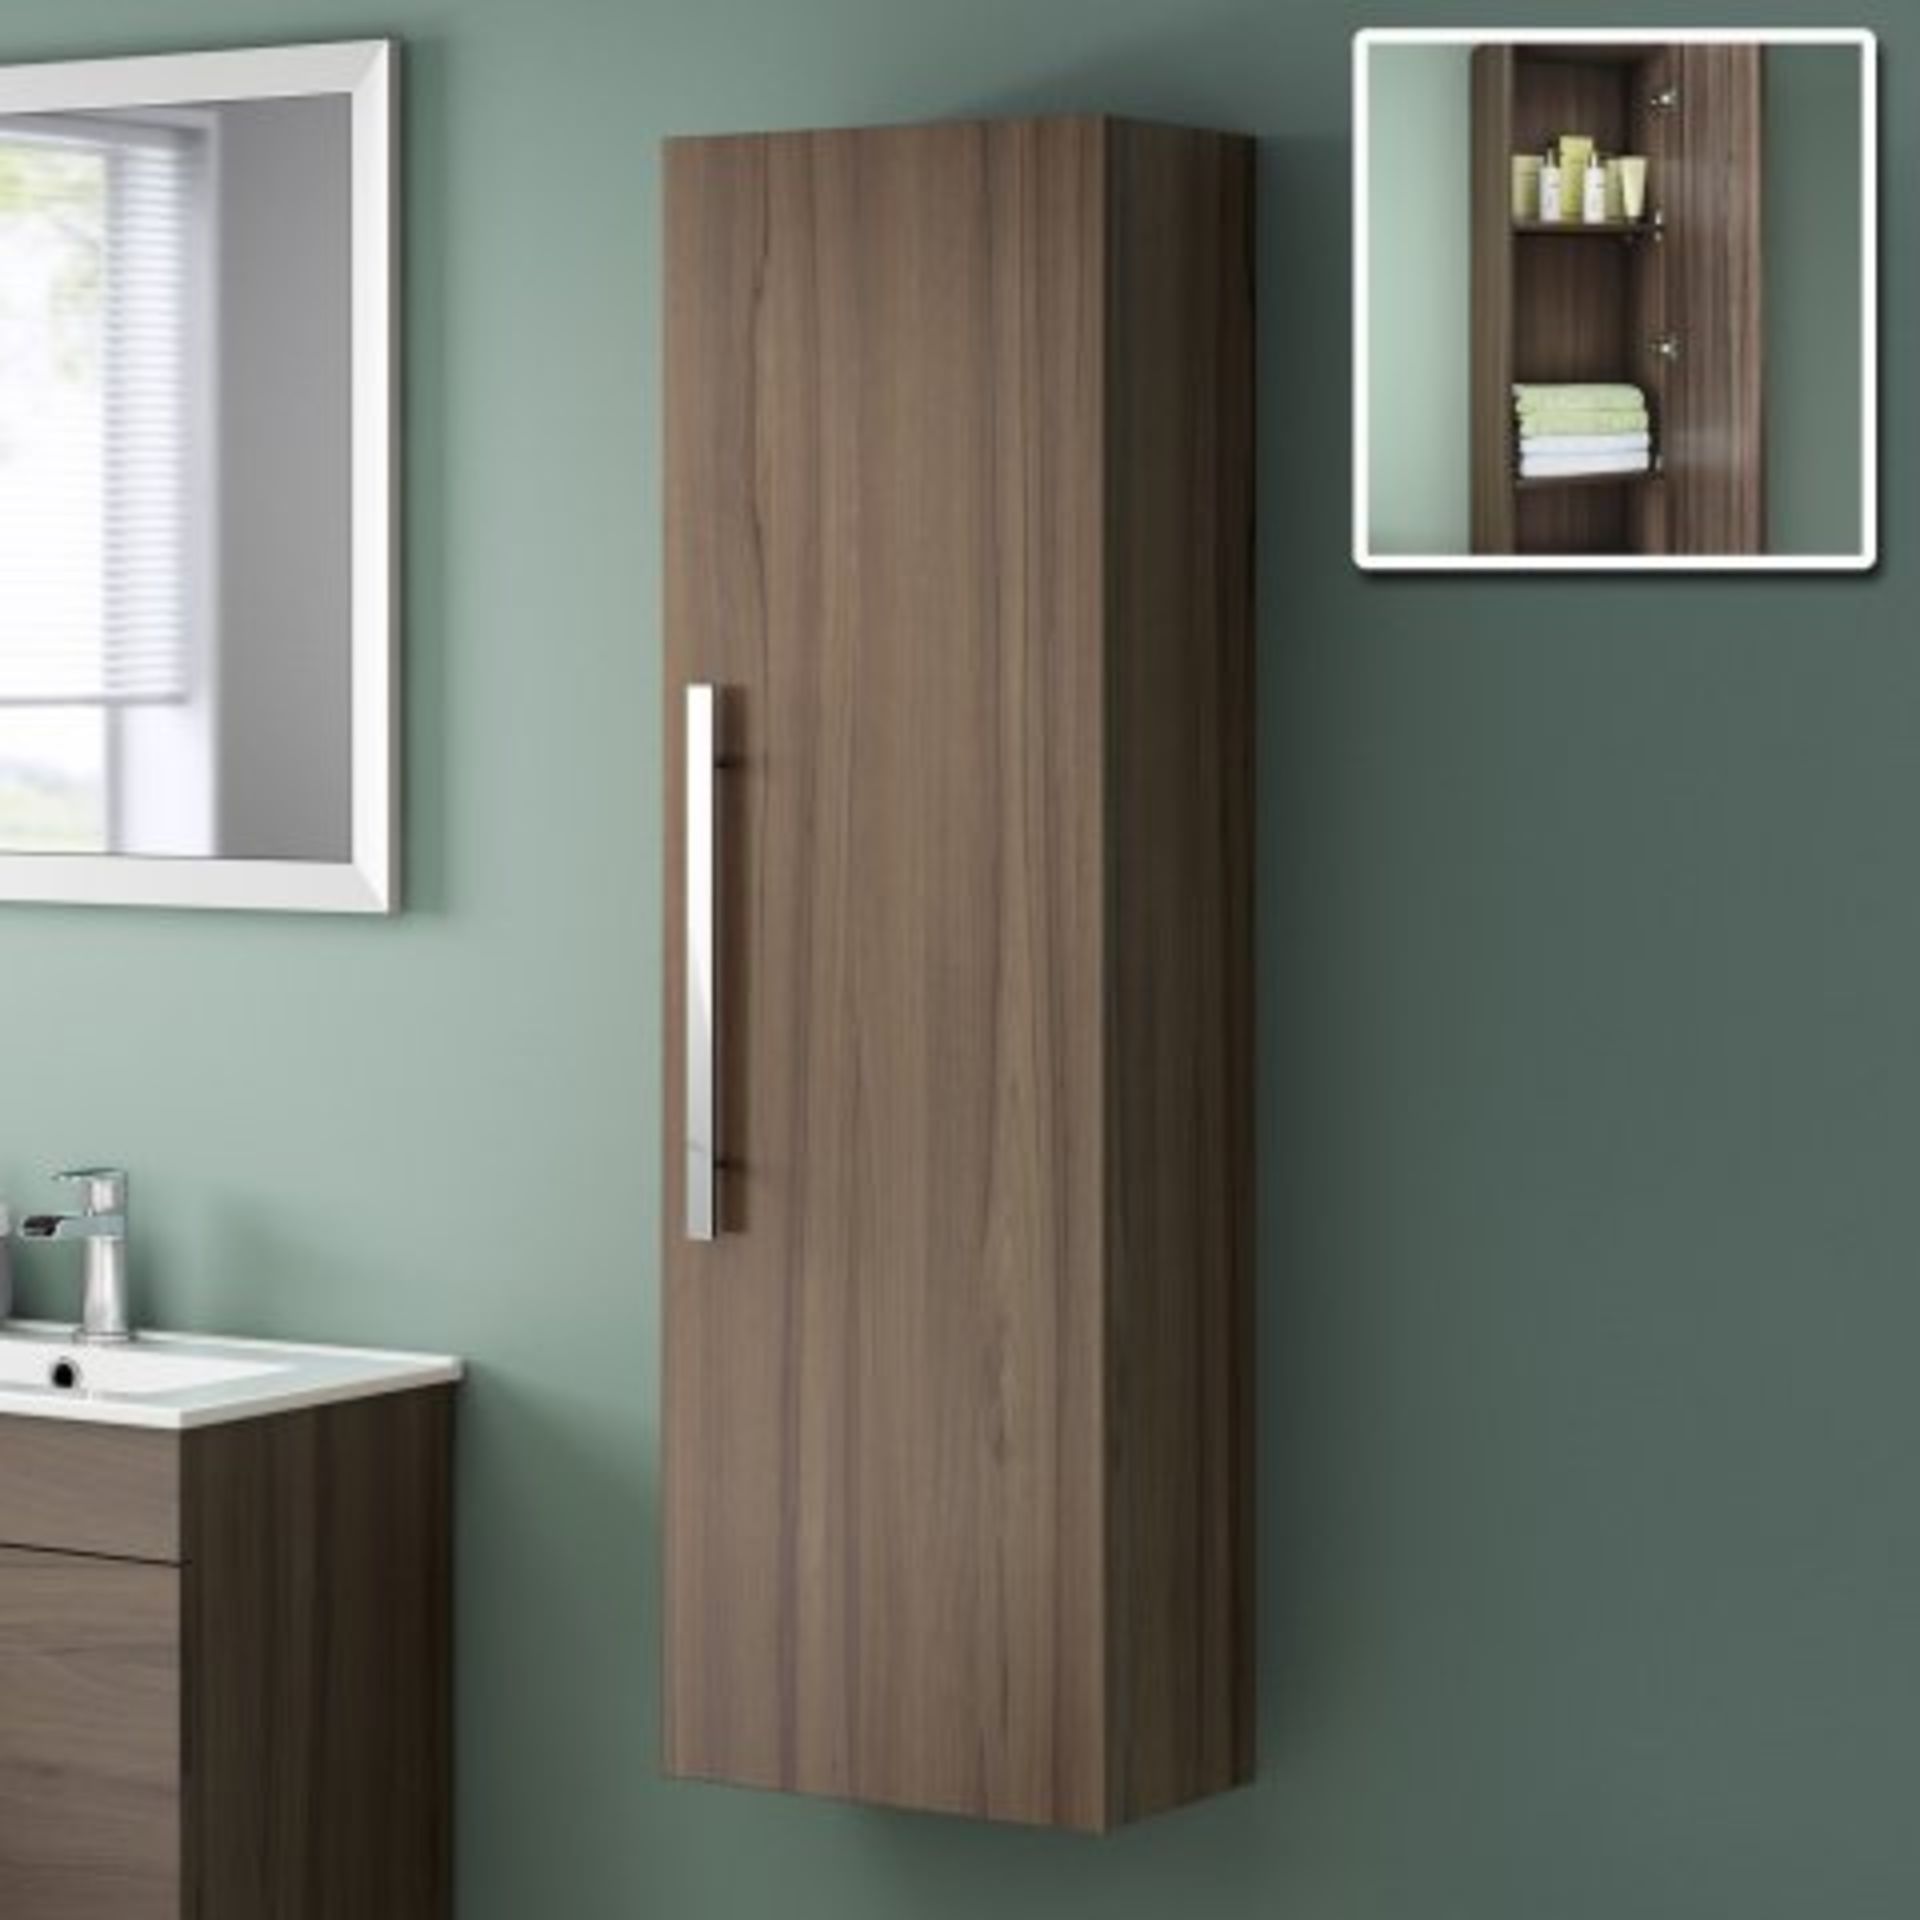 (W274) 1200mm Avon Walnut Effect Tall Storage Cabinet - Wall Hung RRP £274.99 If space saving is